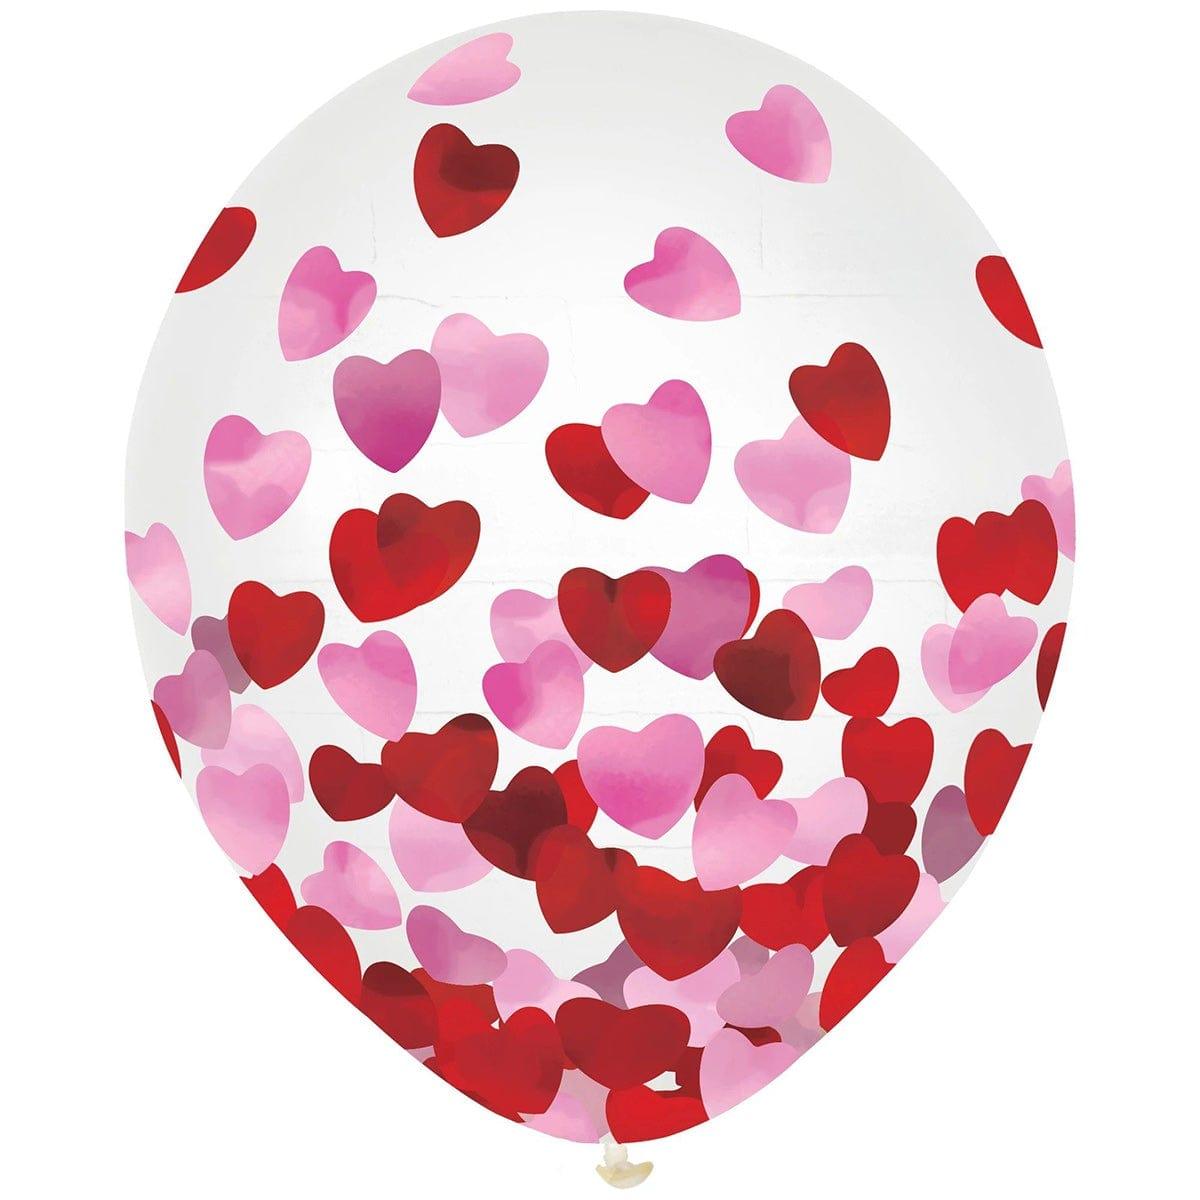 AMSCAN CA Valentine's Day Valentine's Day Latex Balloon with Confetti, 12 inches, 6 Count